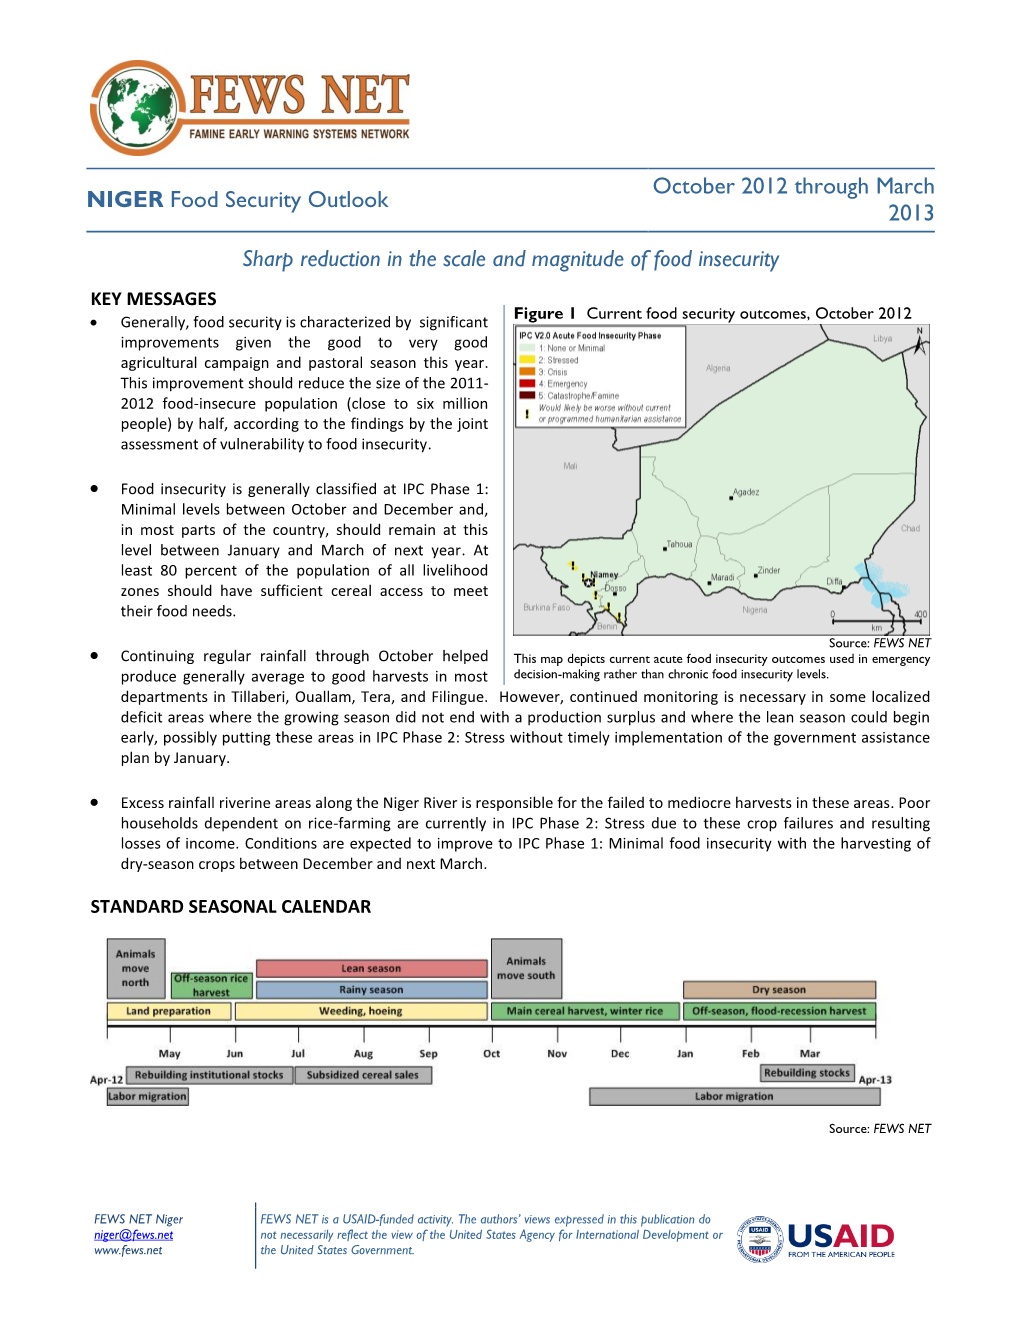 NIGER Food Security Outlook October 2012 Through March 2013 Sharp Reduction in the Scale and Magnitude of Food Insecurity